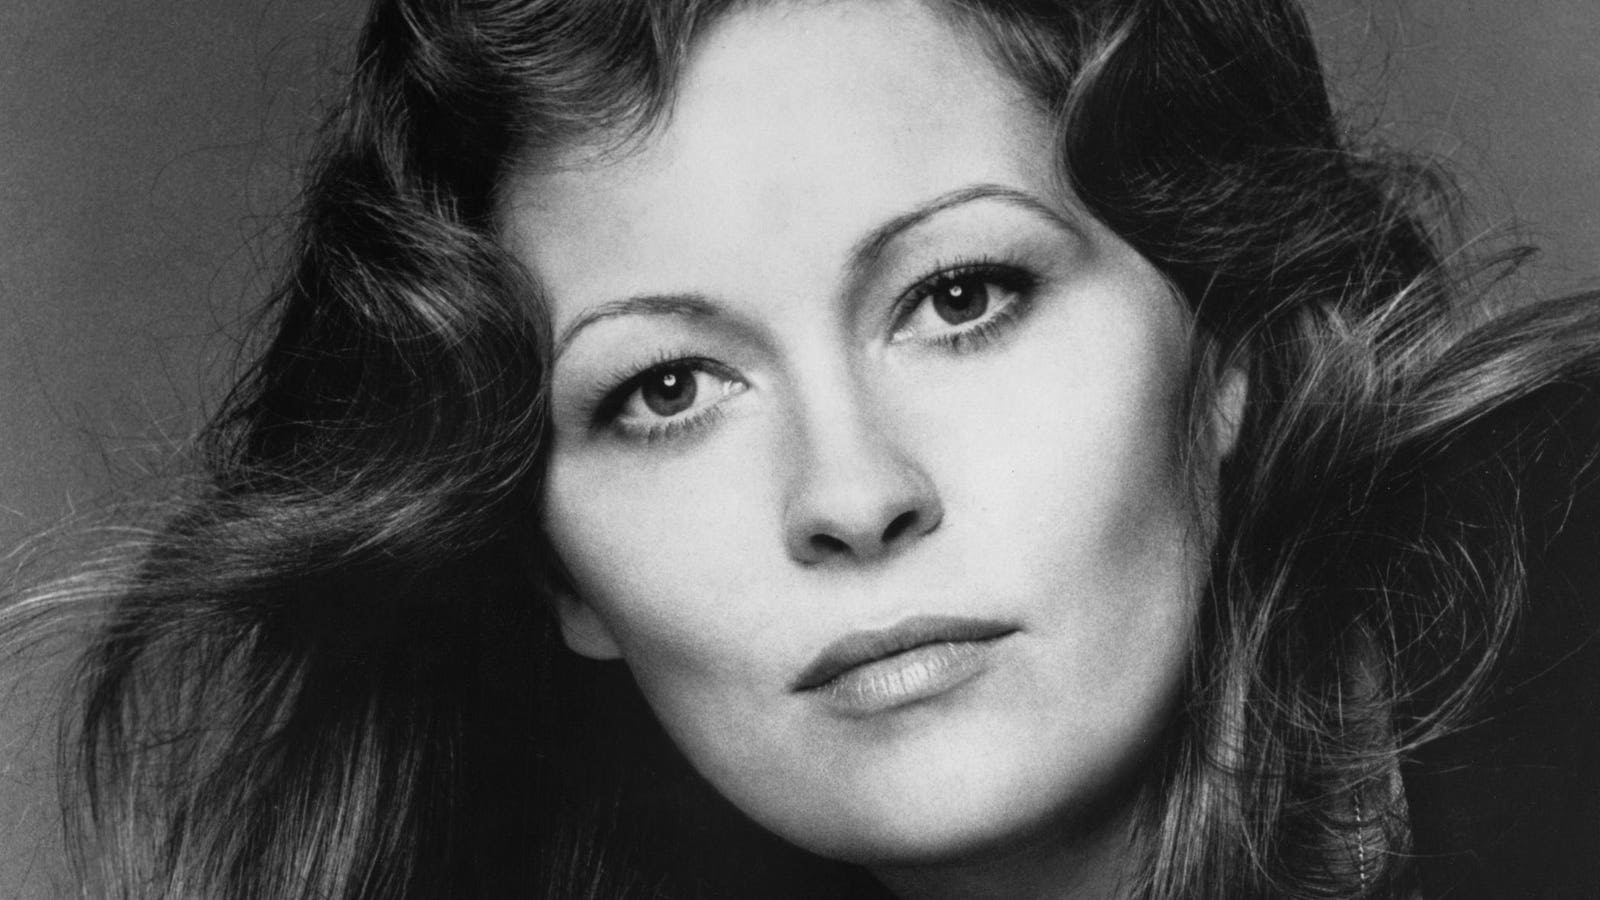 Director Laurent Bouzereau On The Making Of His Faye Dunaway Documentary: ‘I Wanted To Be Honest And Raw’